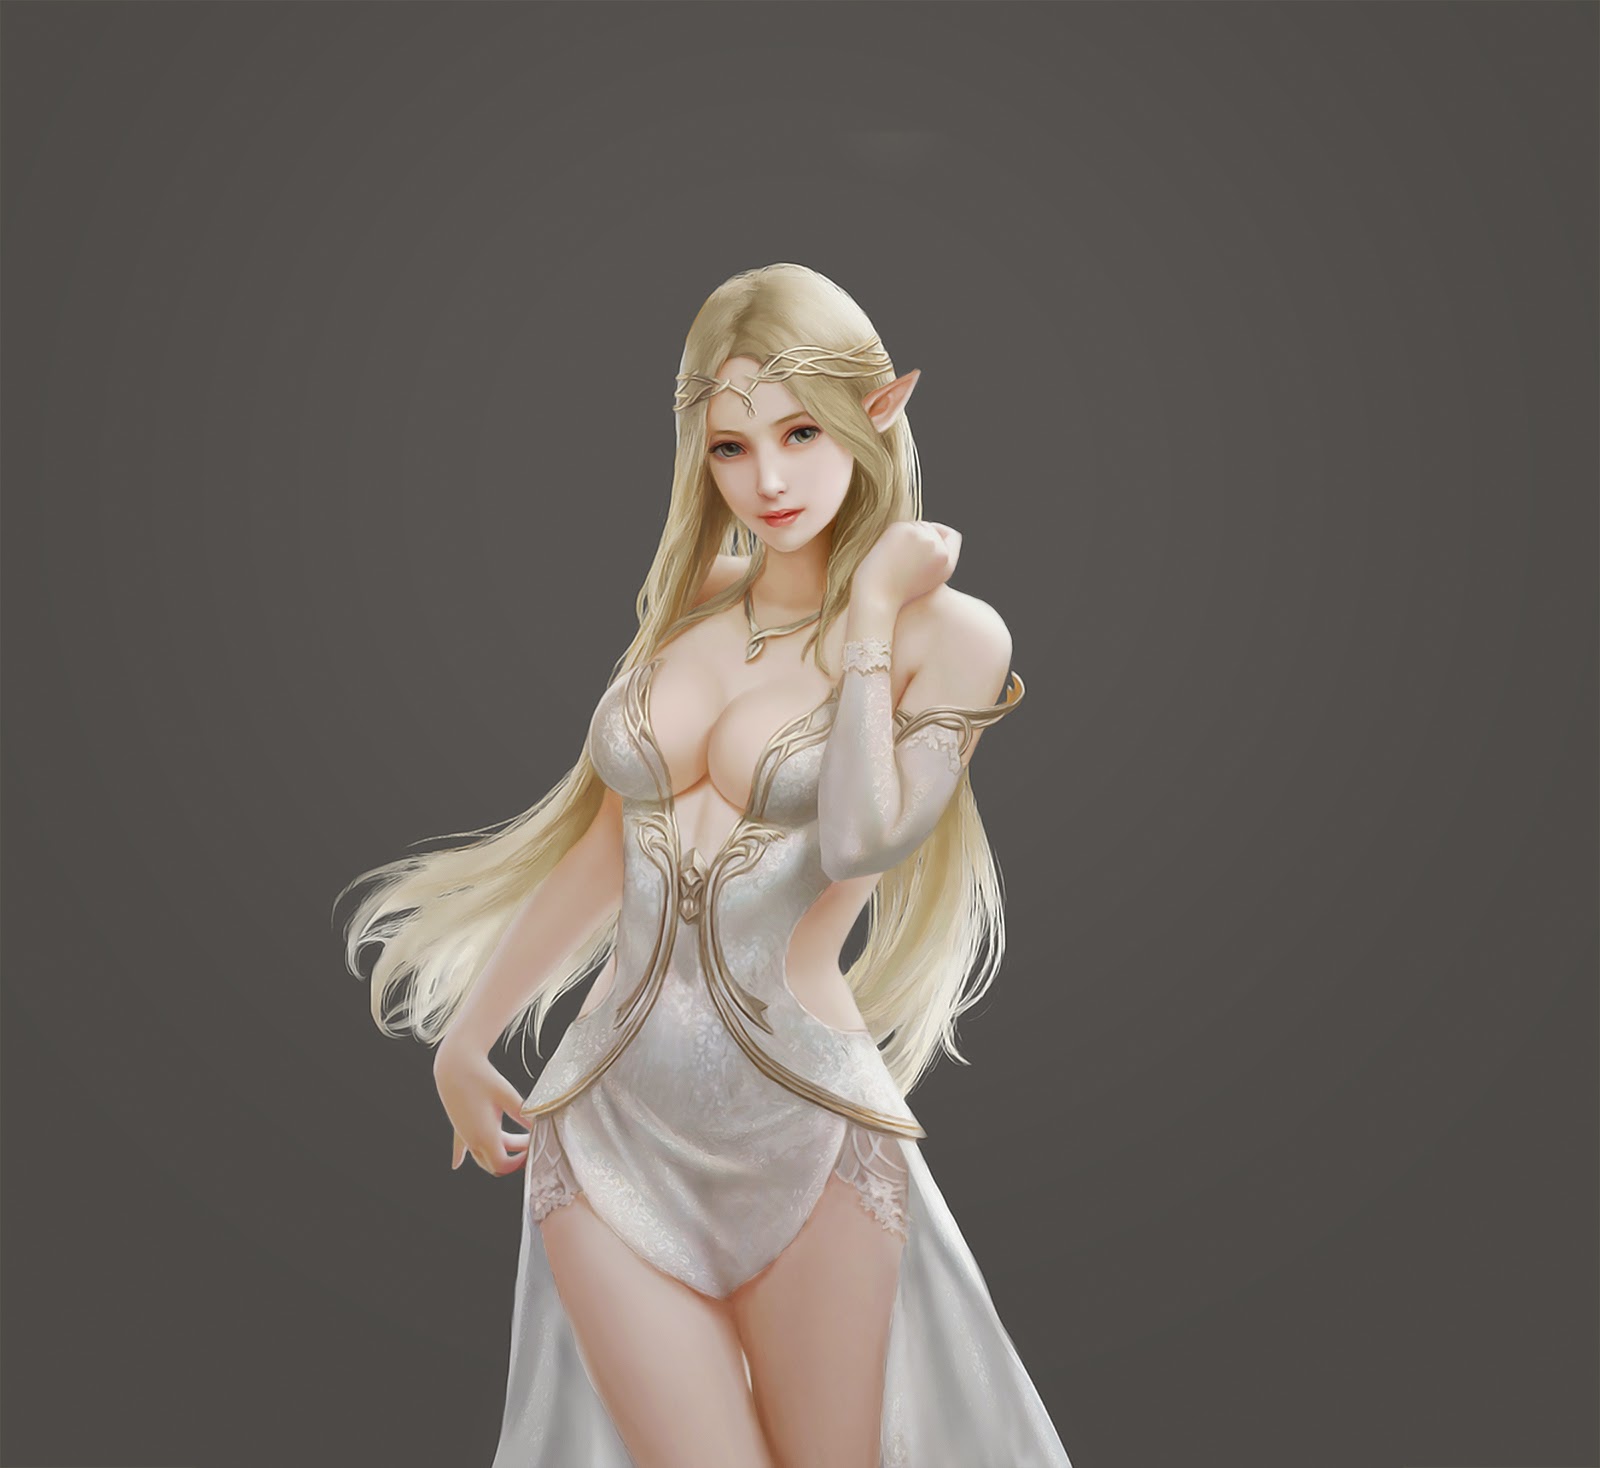 Sexy Fairy Tale Girls wallpapers.